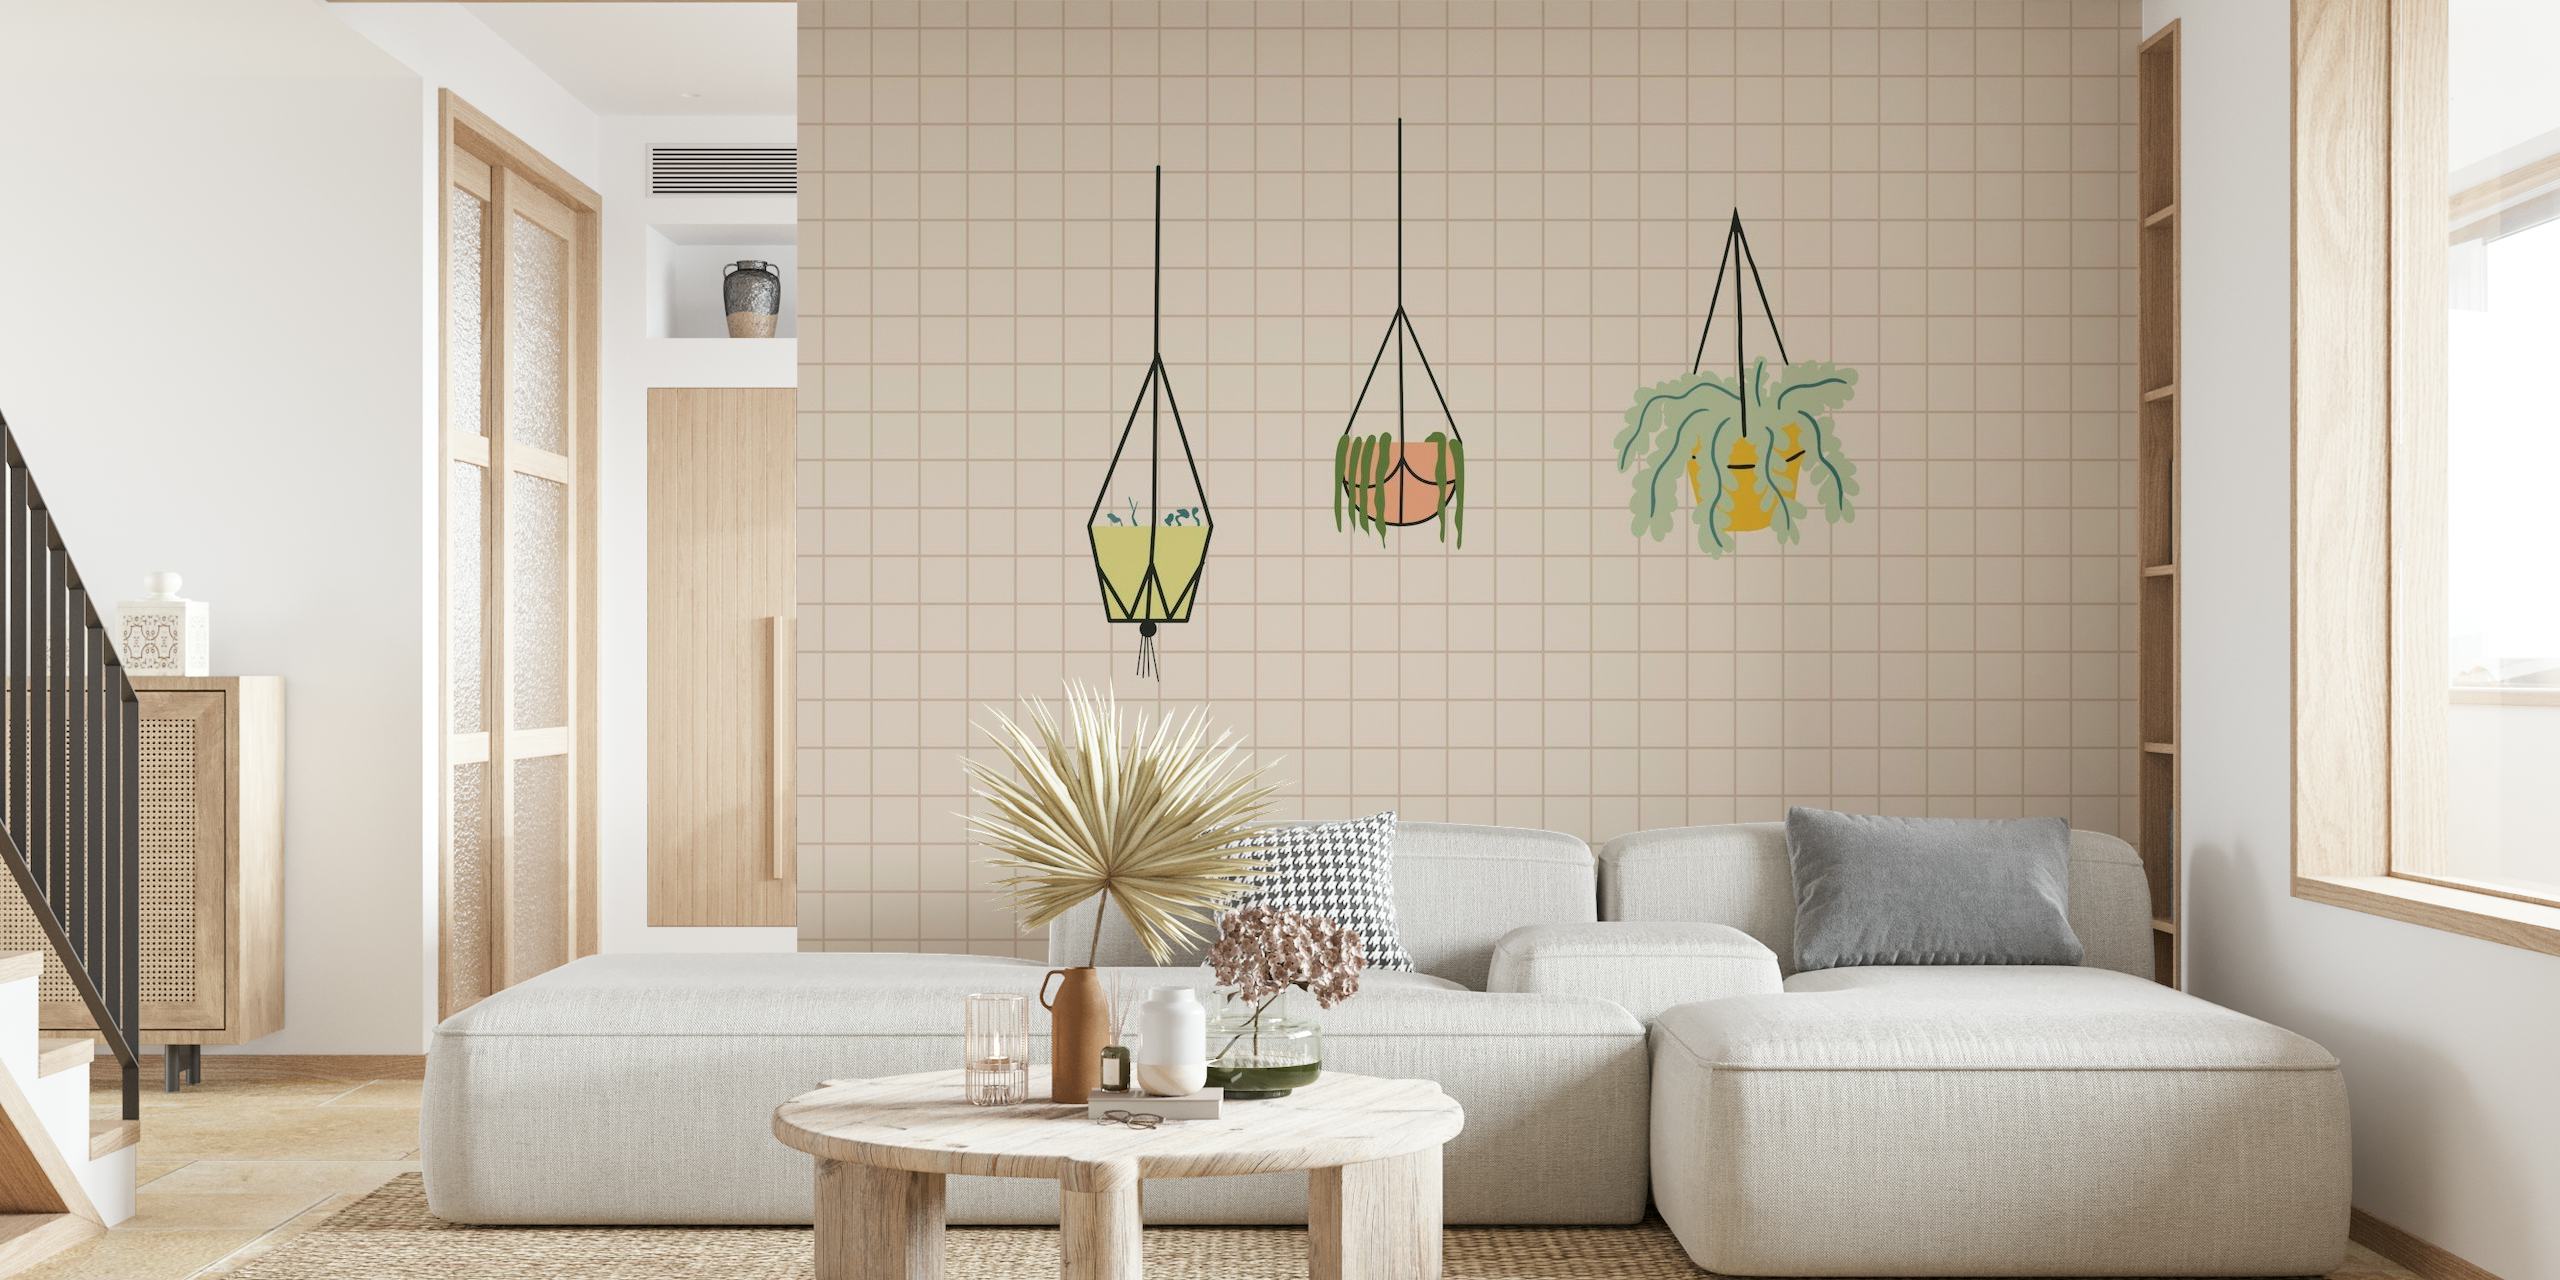 Modern Bauhaus-inspired wall mural featuring sketched hanging plants in geometric pots on a tiled grid background